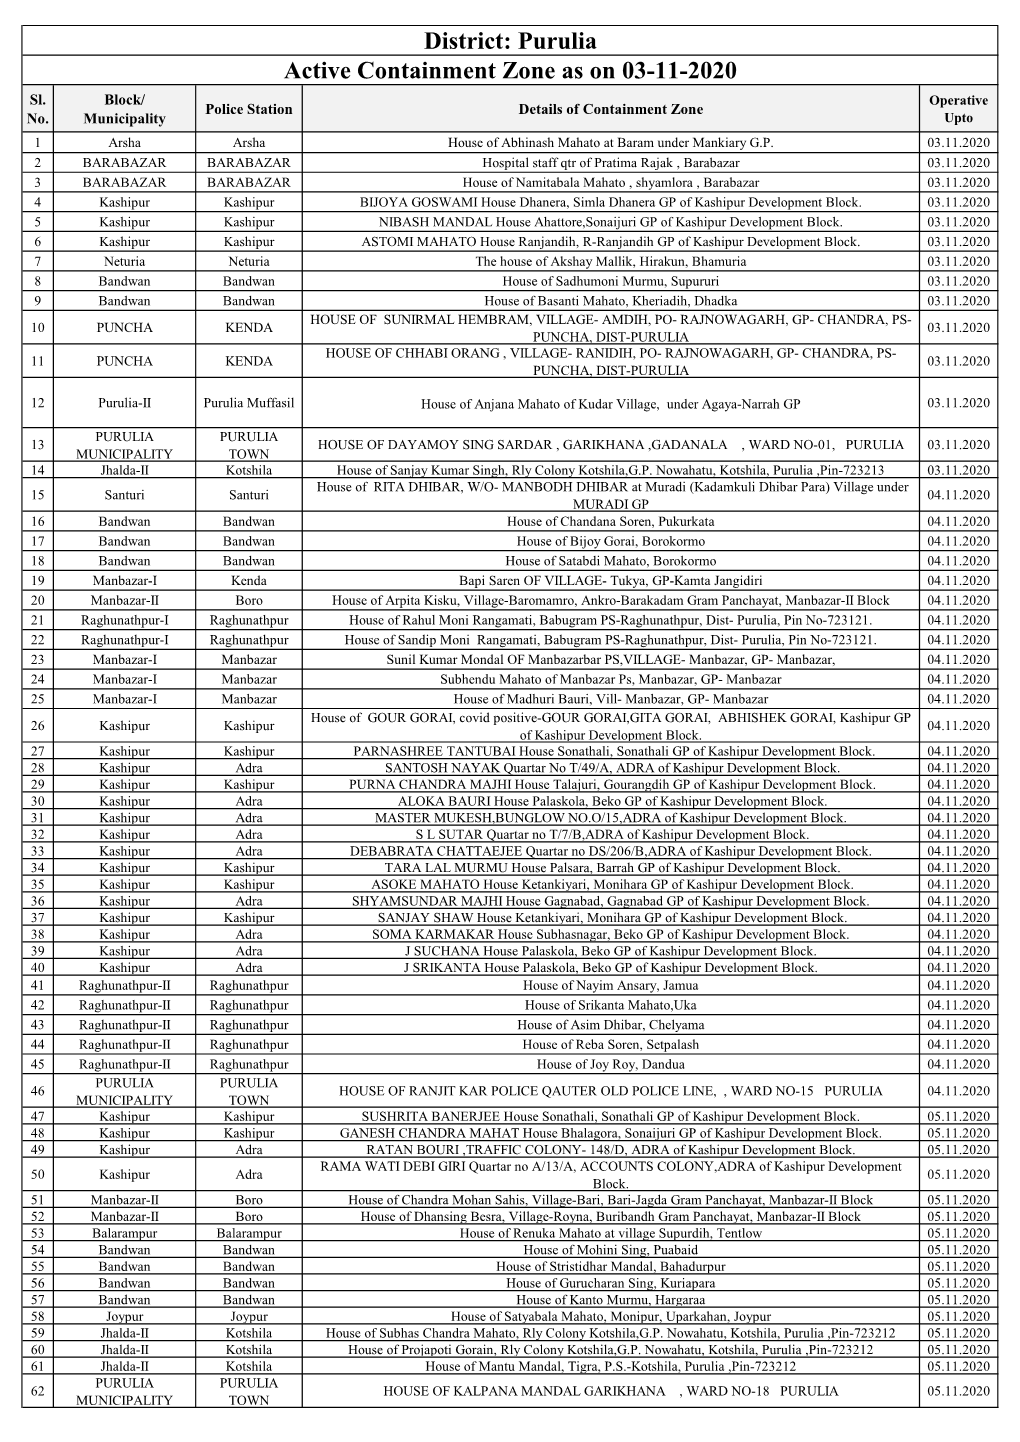 Active Containment Zone As on 03-11-2020 District: Purulia